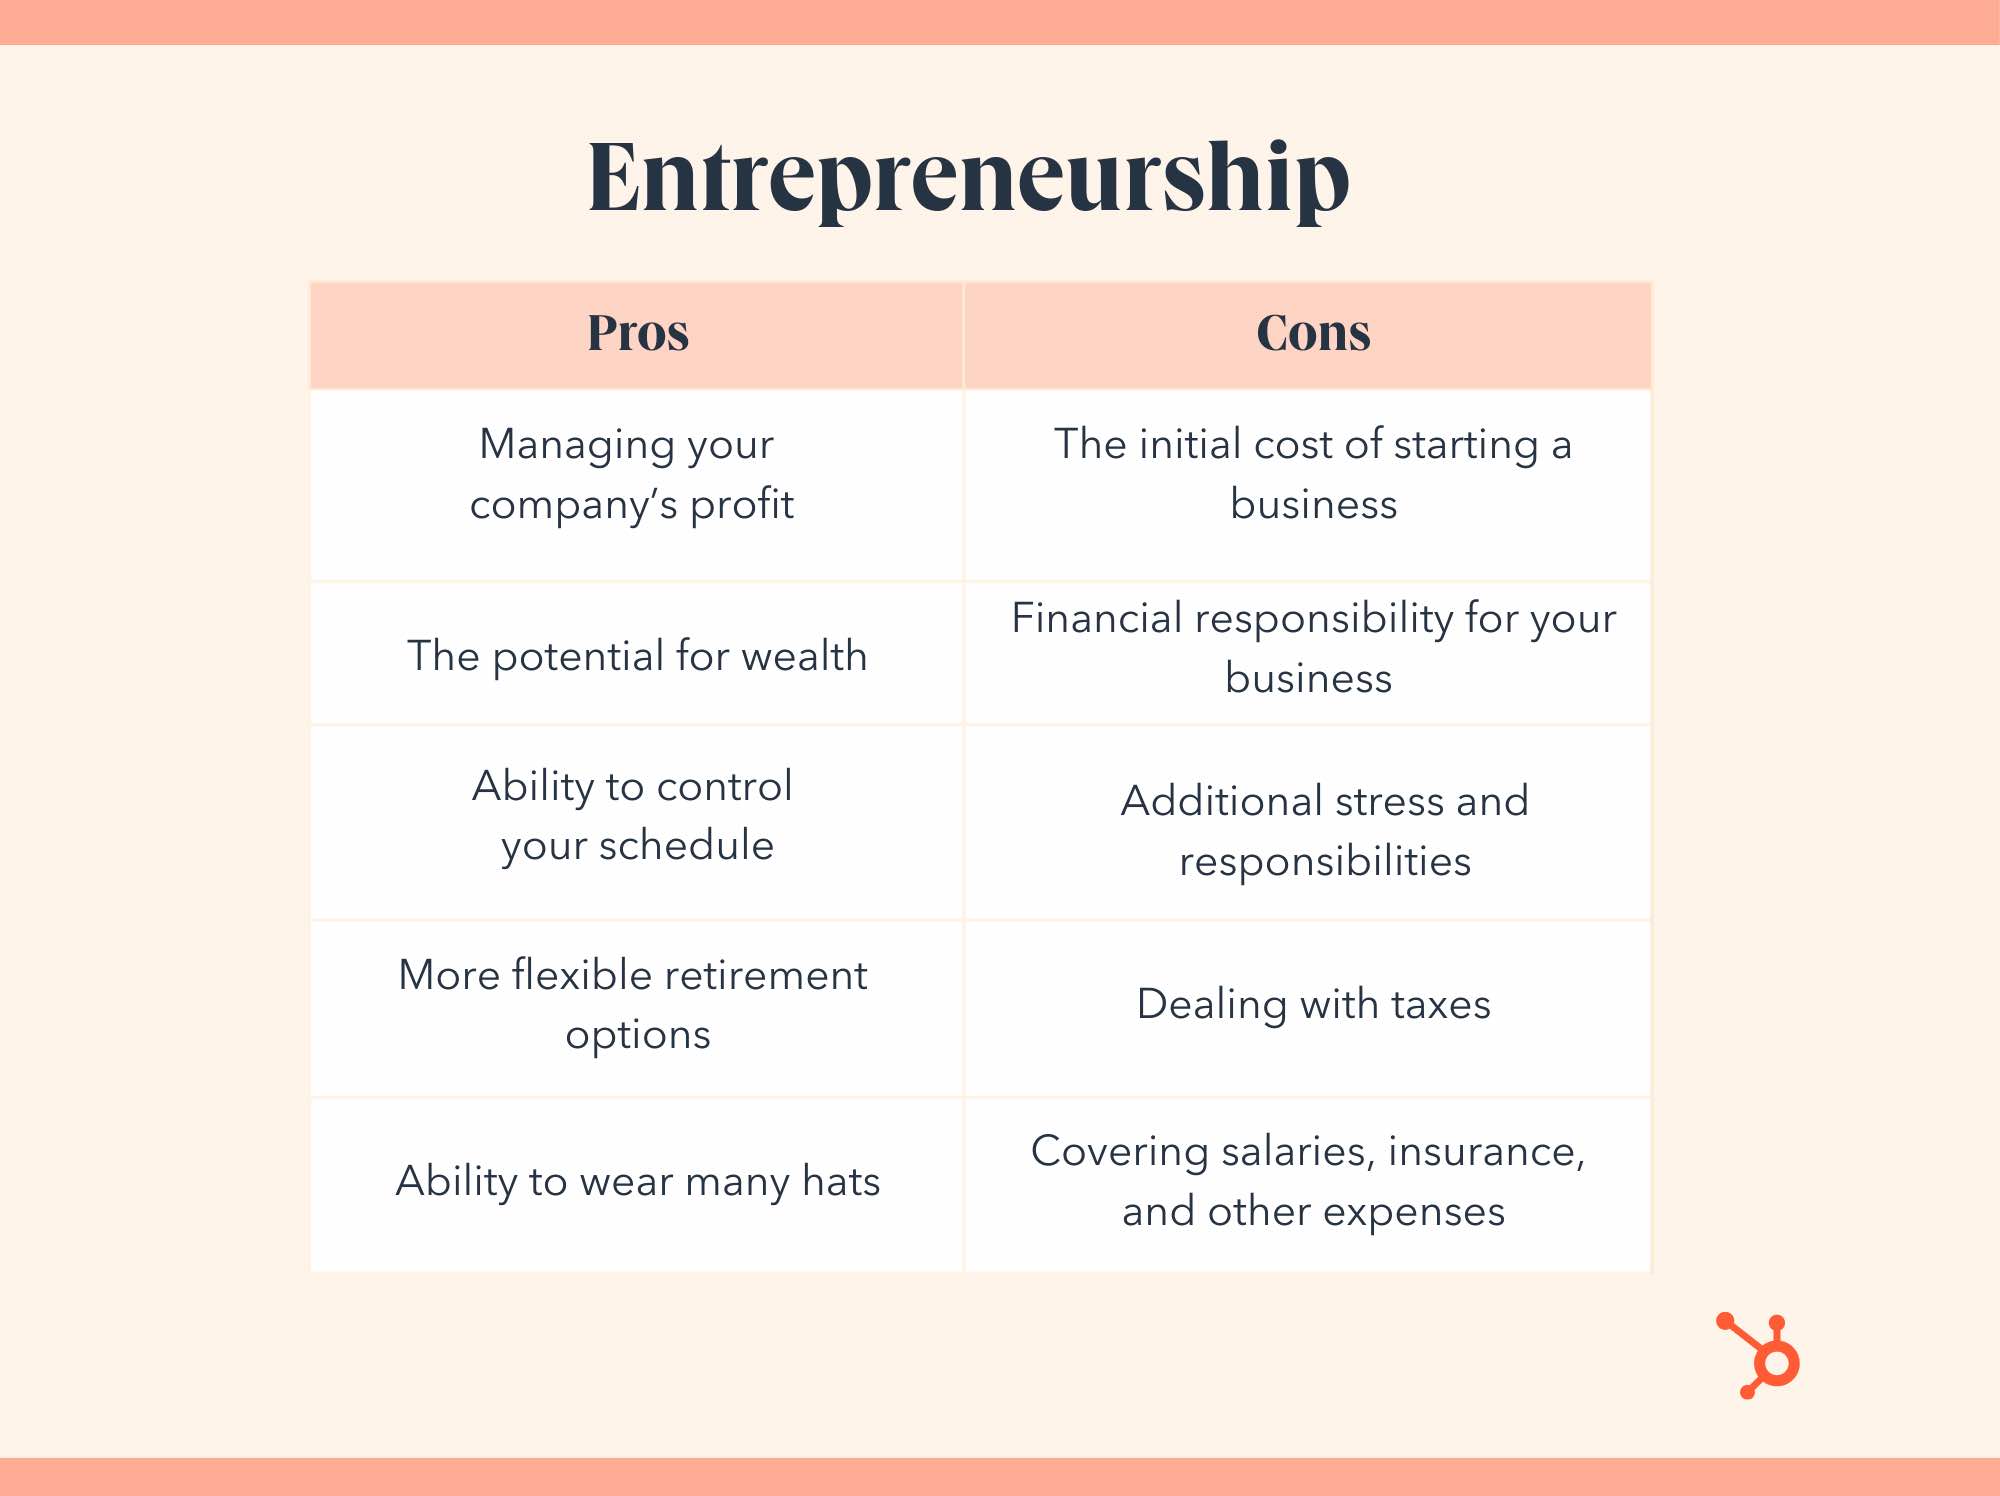 entrepreneurship vs employment. Entrepreneurship pro: managing your company profit, potential for wealth, ability to control your schedule, flexible retirement. Entrepreneurship con: initial costs, financial responsibility, additional stress, taxes, covering salaries and insurance.